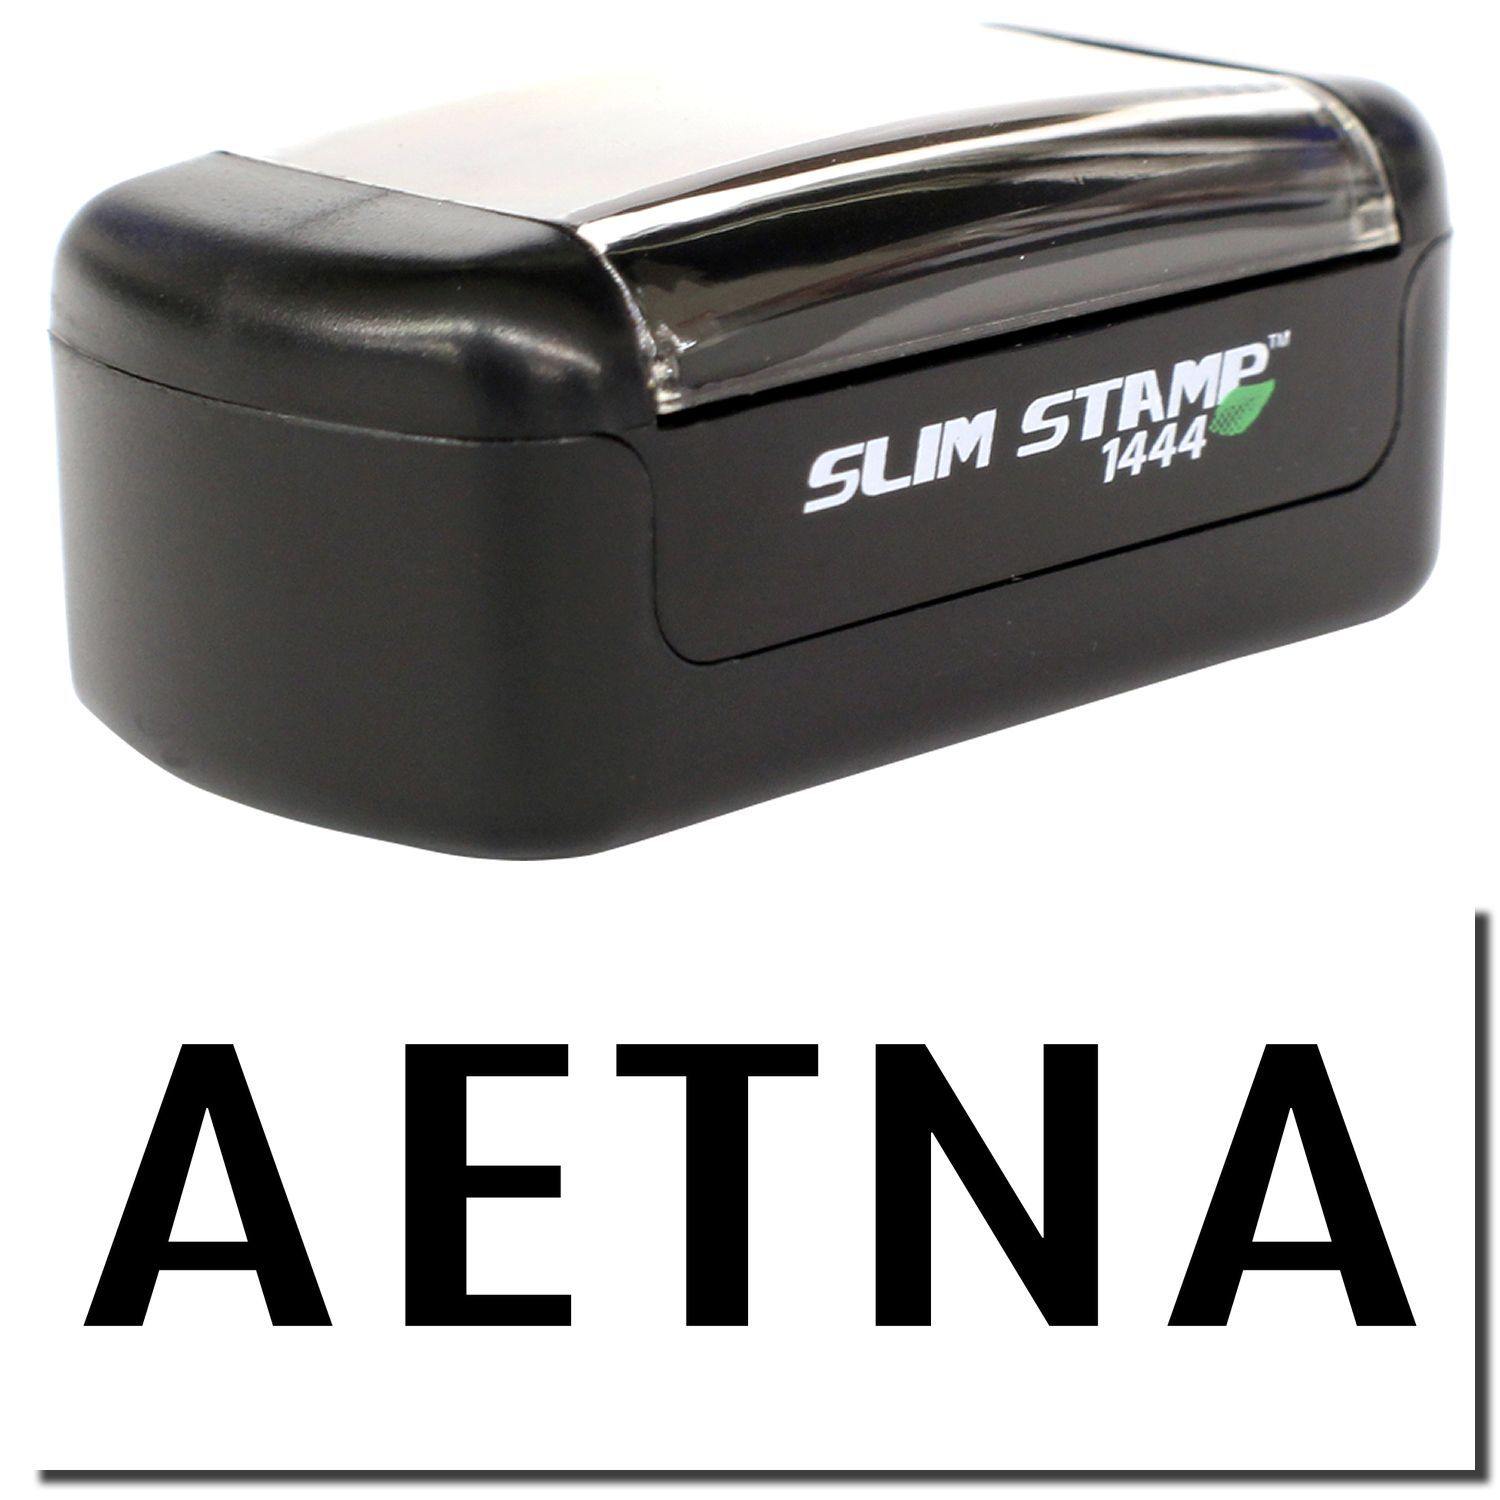 A stock office pre-inked stamp with a stamped image showing how the text "AETNA" is displayed after stamping.